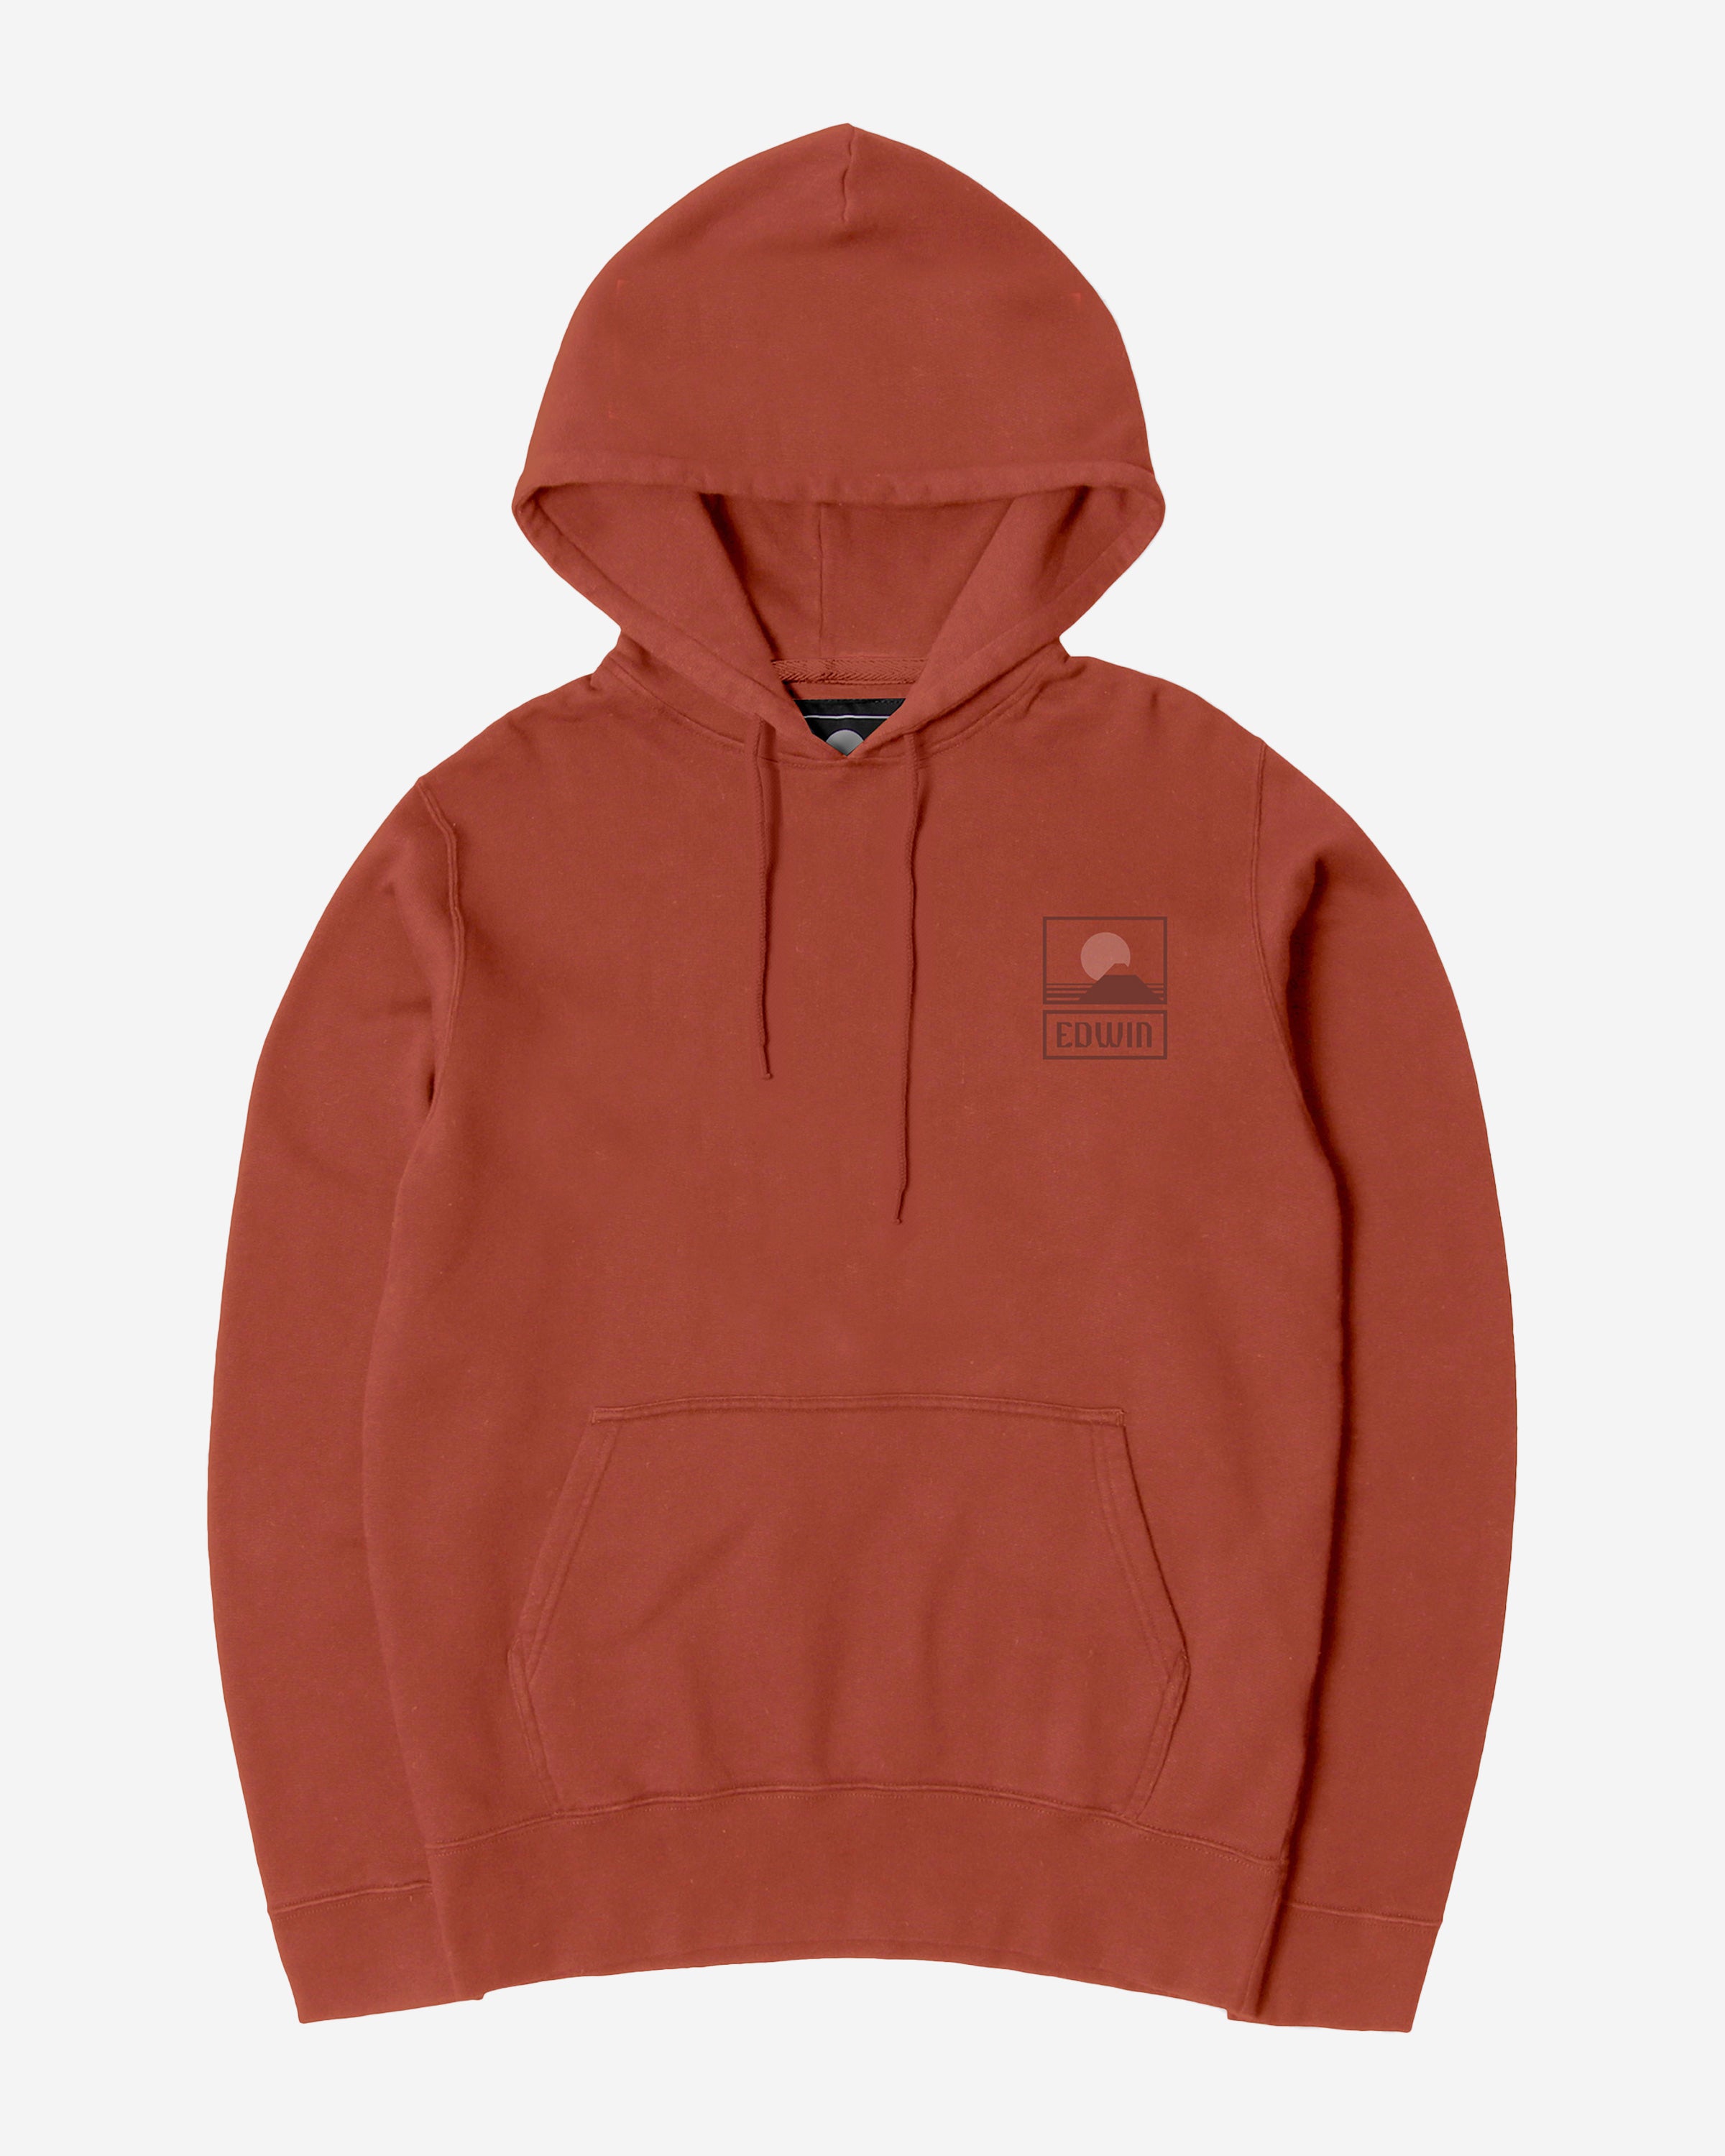 The Sunset On MT Fuji Hoodie Sweat is made of Heavy Brushed Felpa and has a hood and a front pocket. As the name suggests, the chest graphic shows a sunset over Mount Fuji in all its glory.